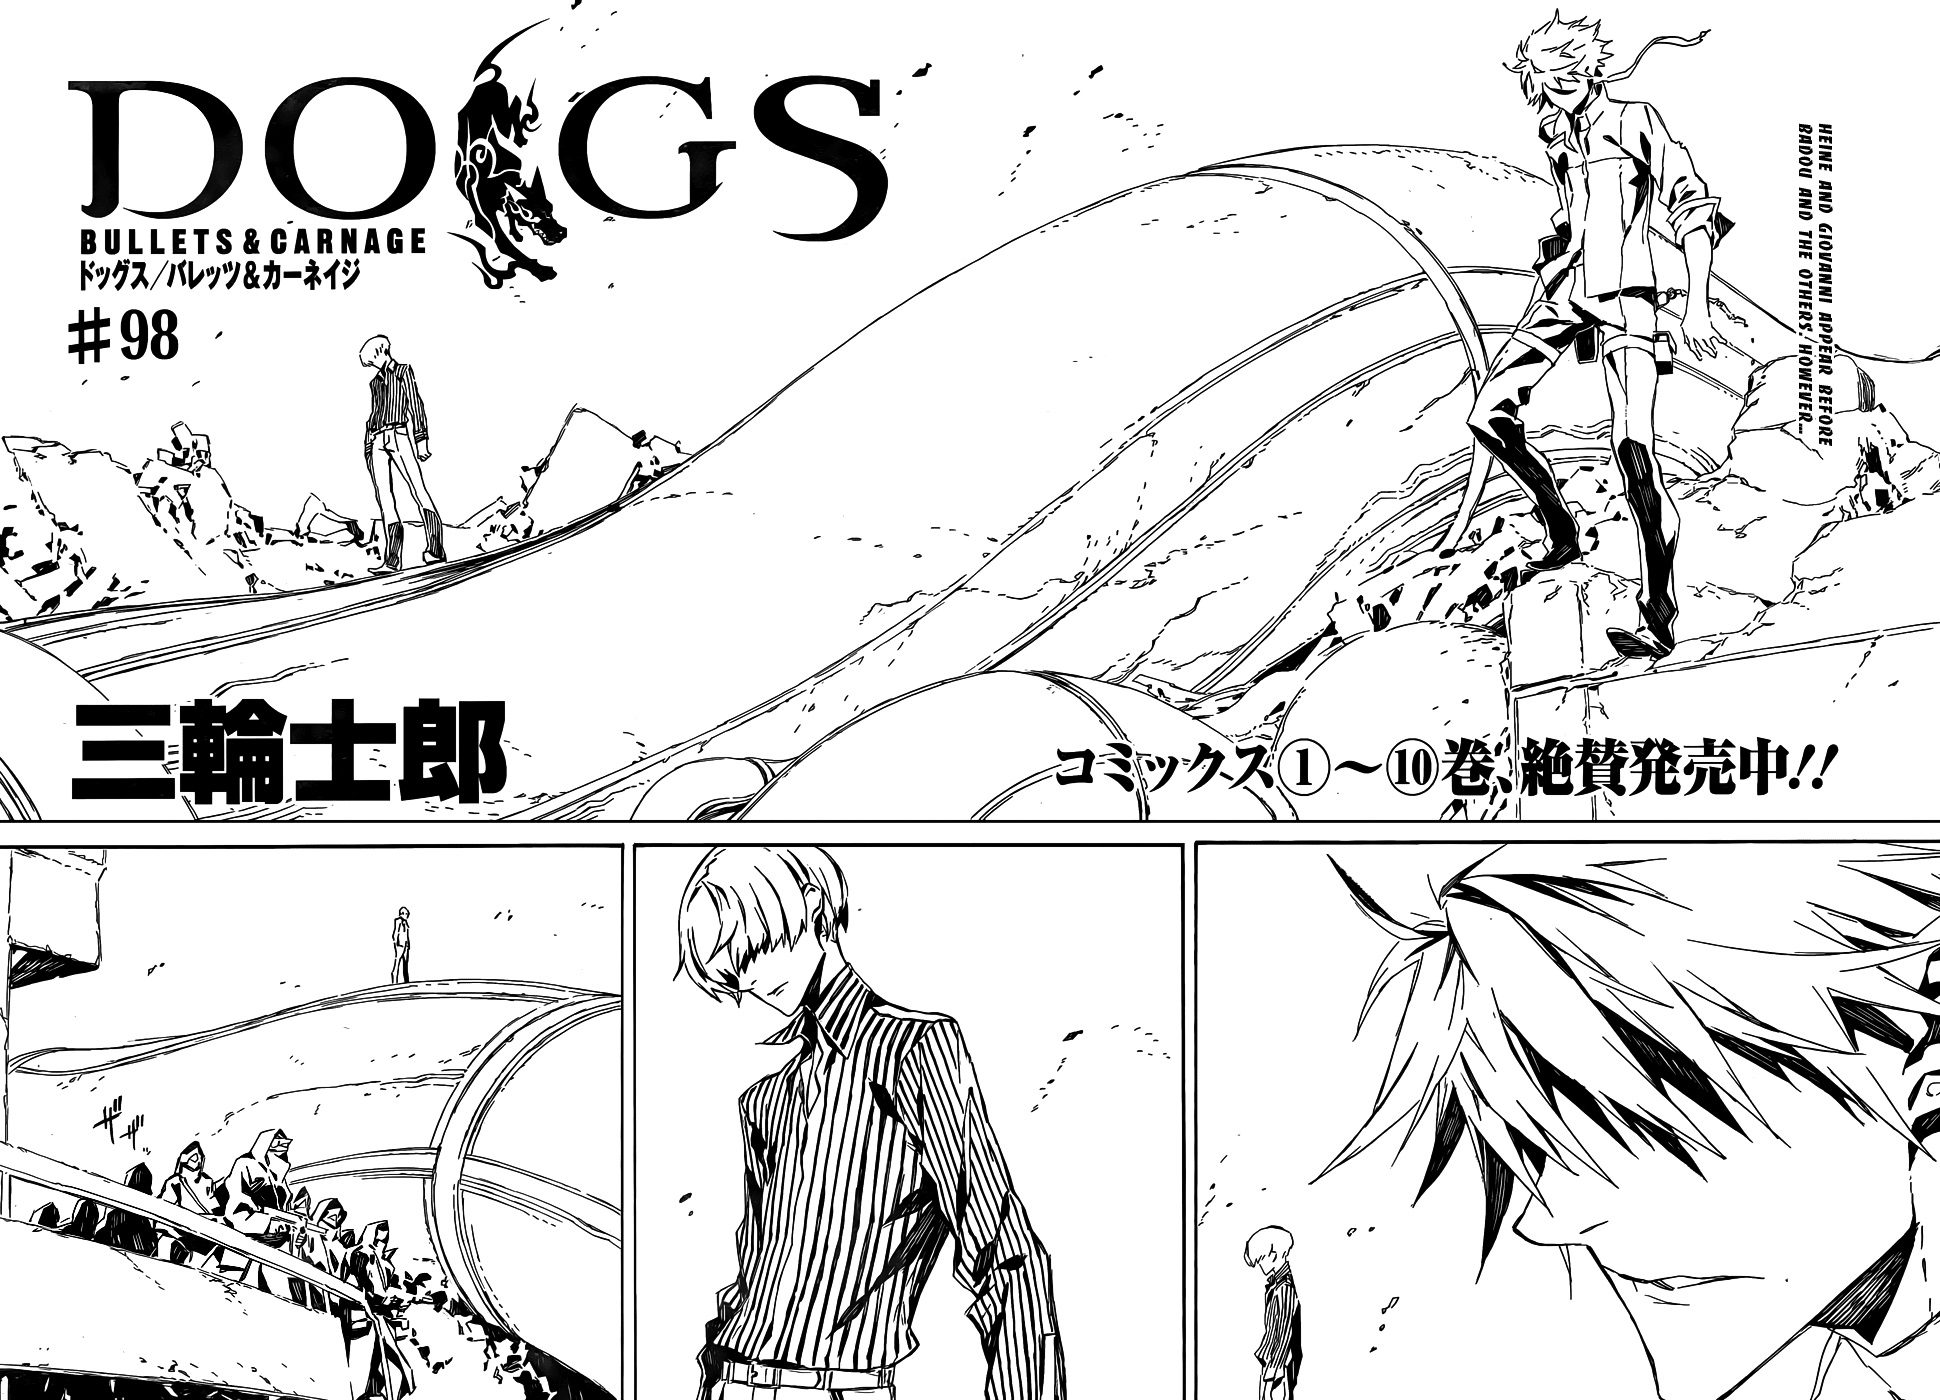 Chapter 98 Bullets Carnage Dogs Bullets And Carnage Wiki Fandom